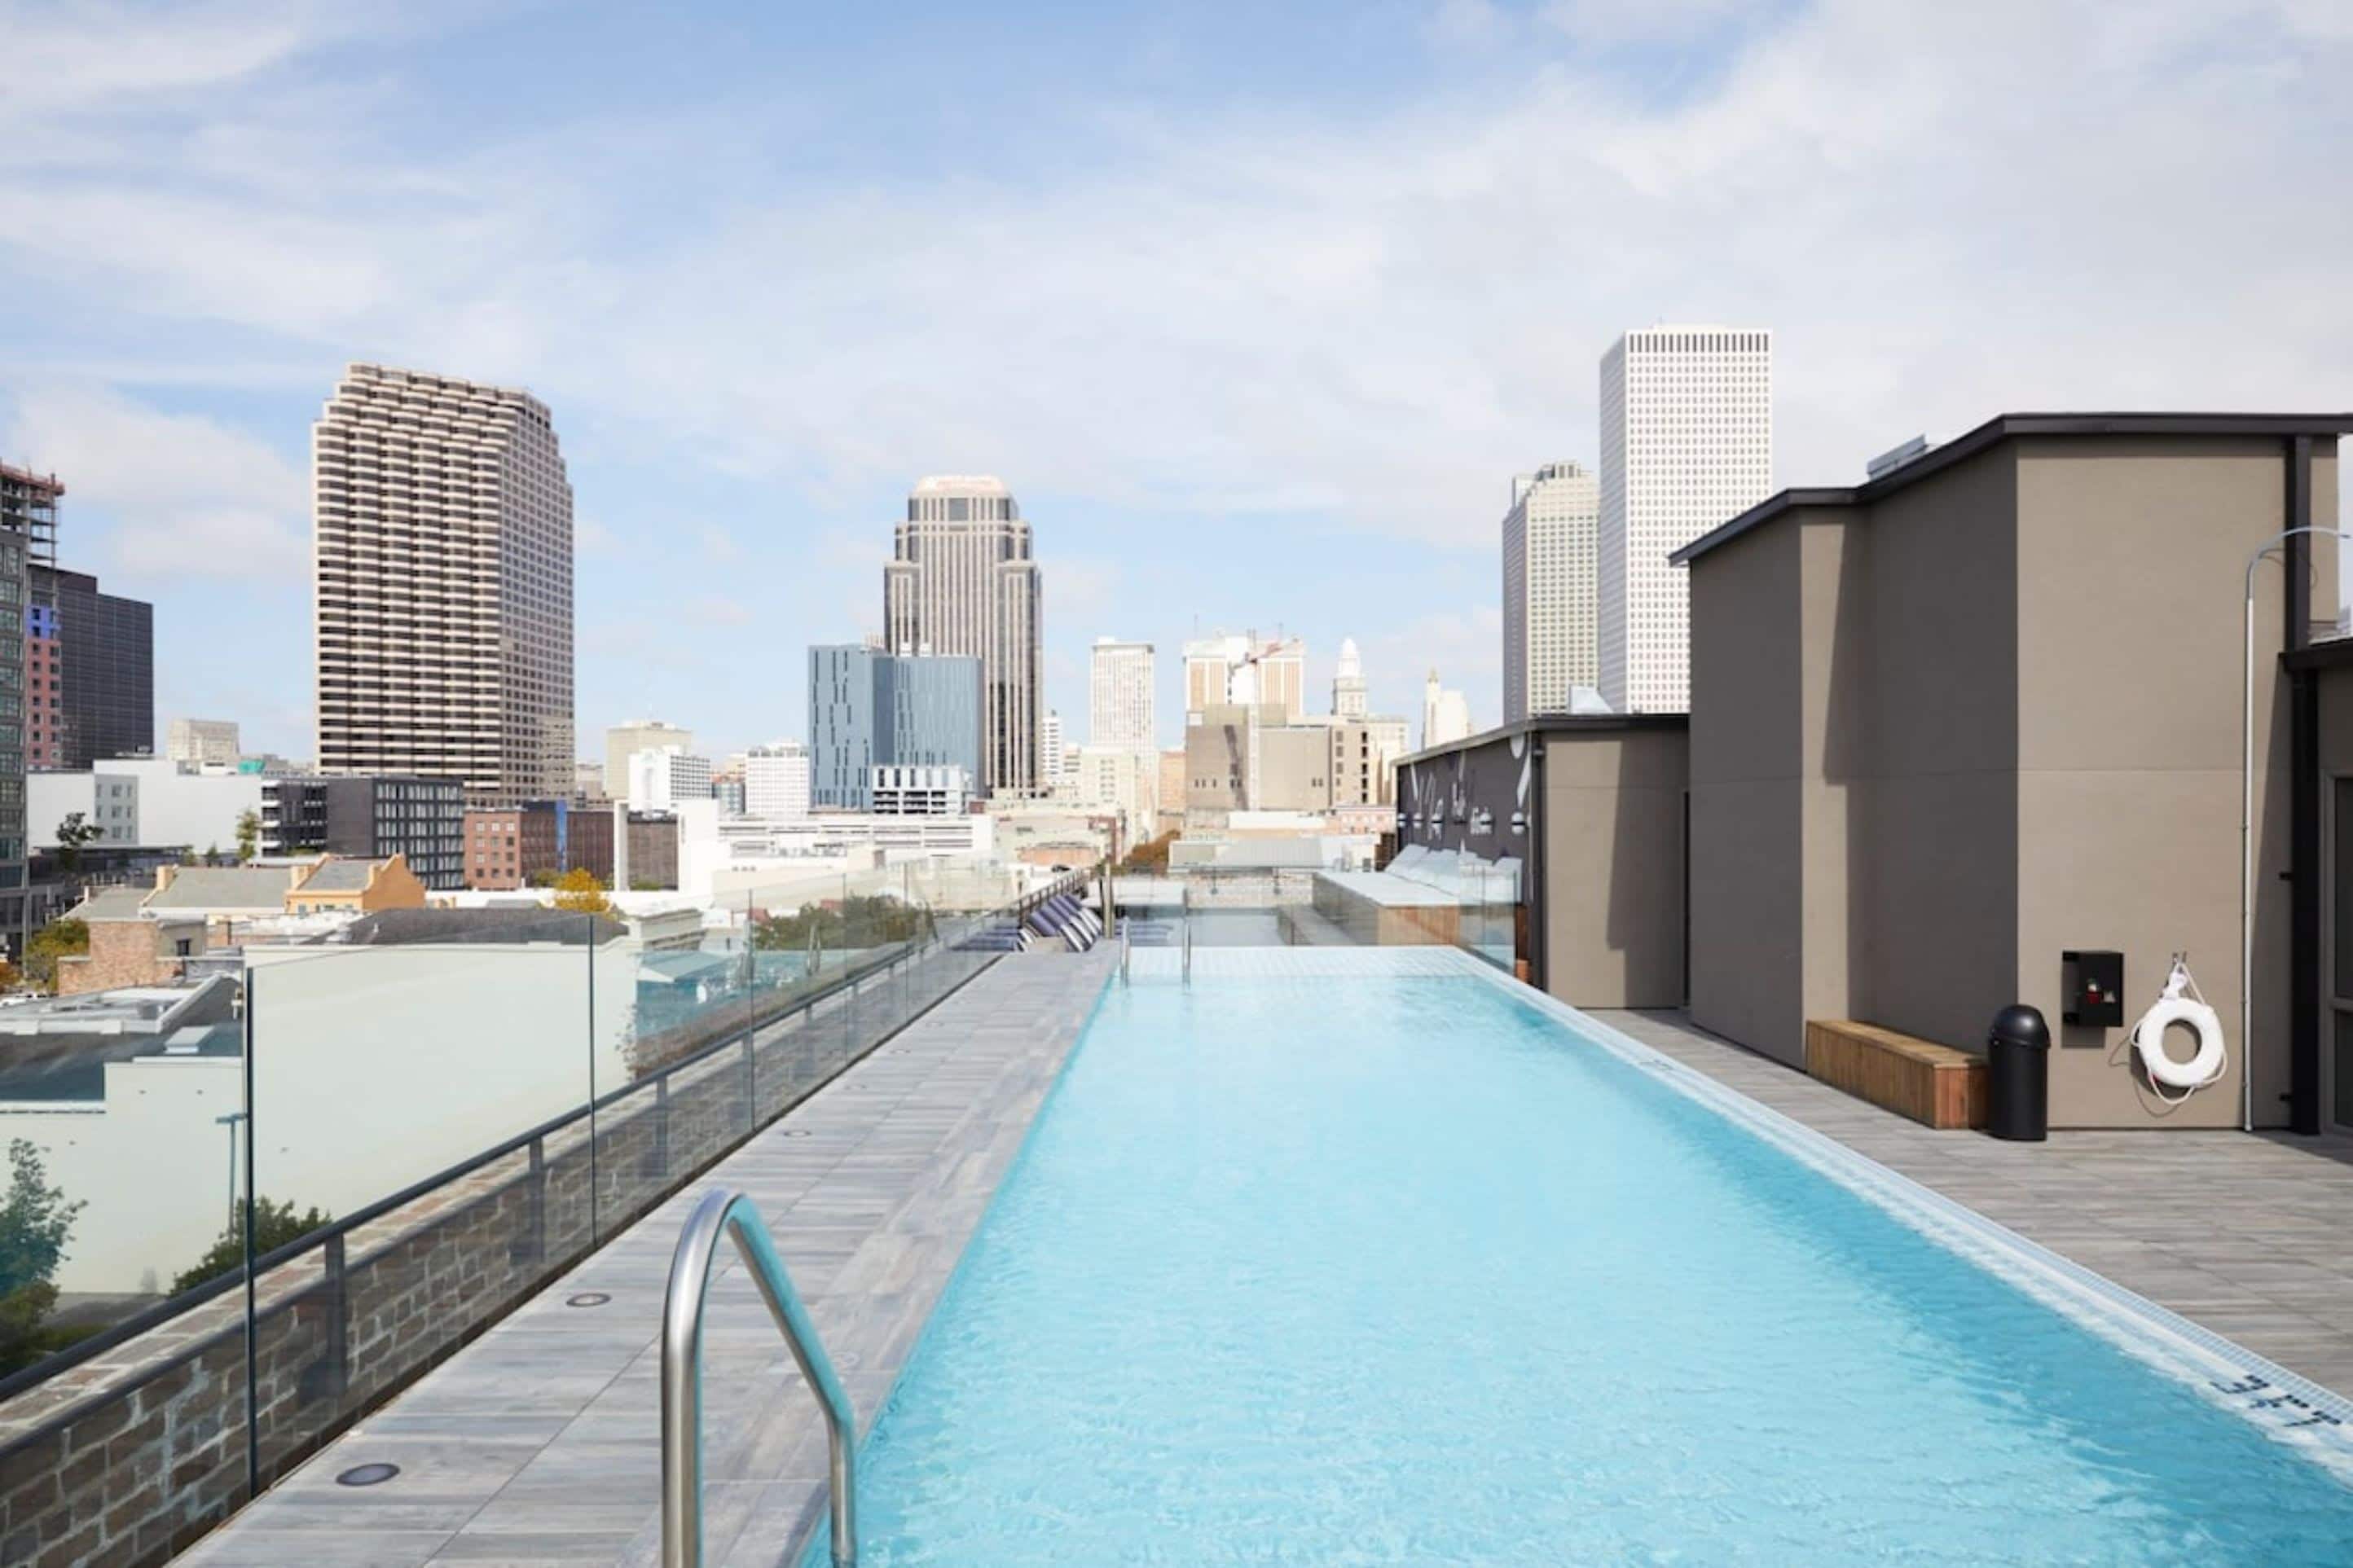 Property Image 2 - The Brandywine | Rooftop Pool | 5 min drive to Bourbon St  | Penthouse | 2 Bed 2 Bath